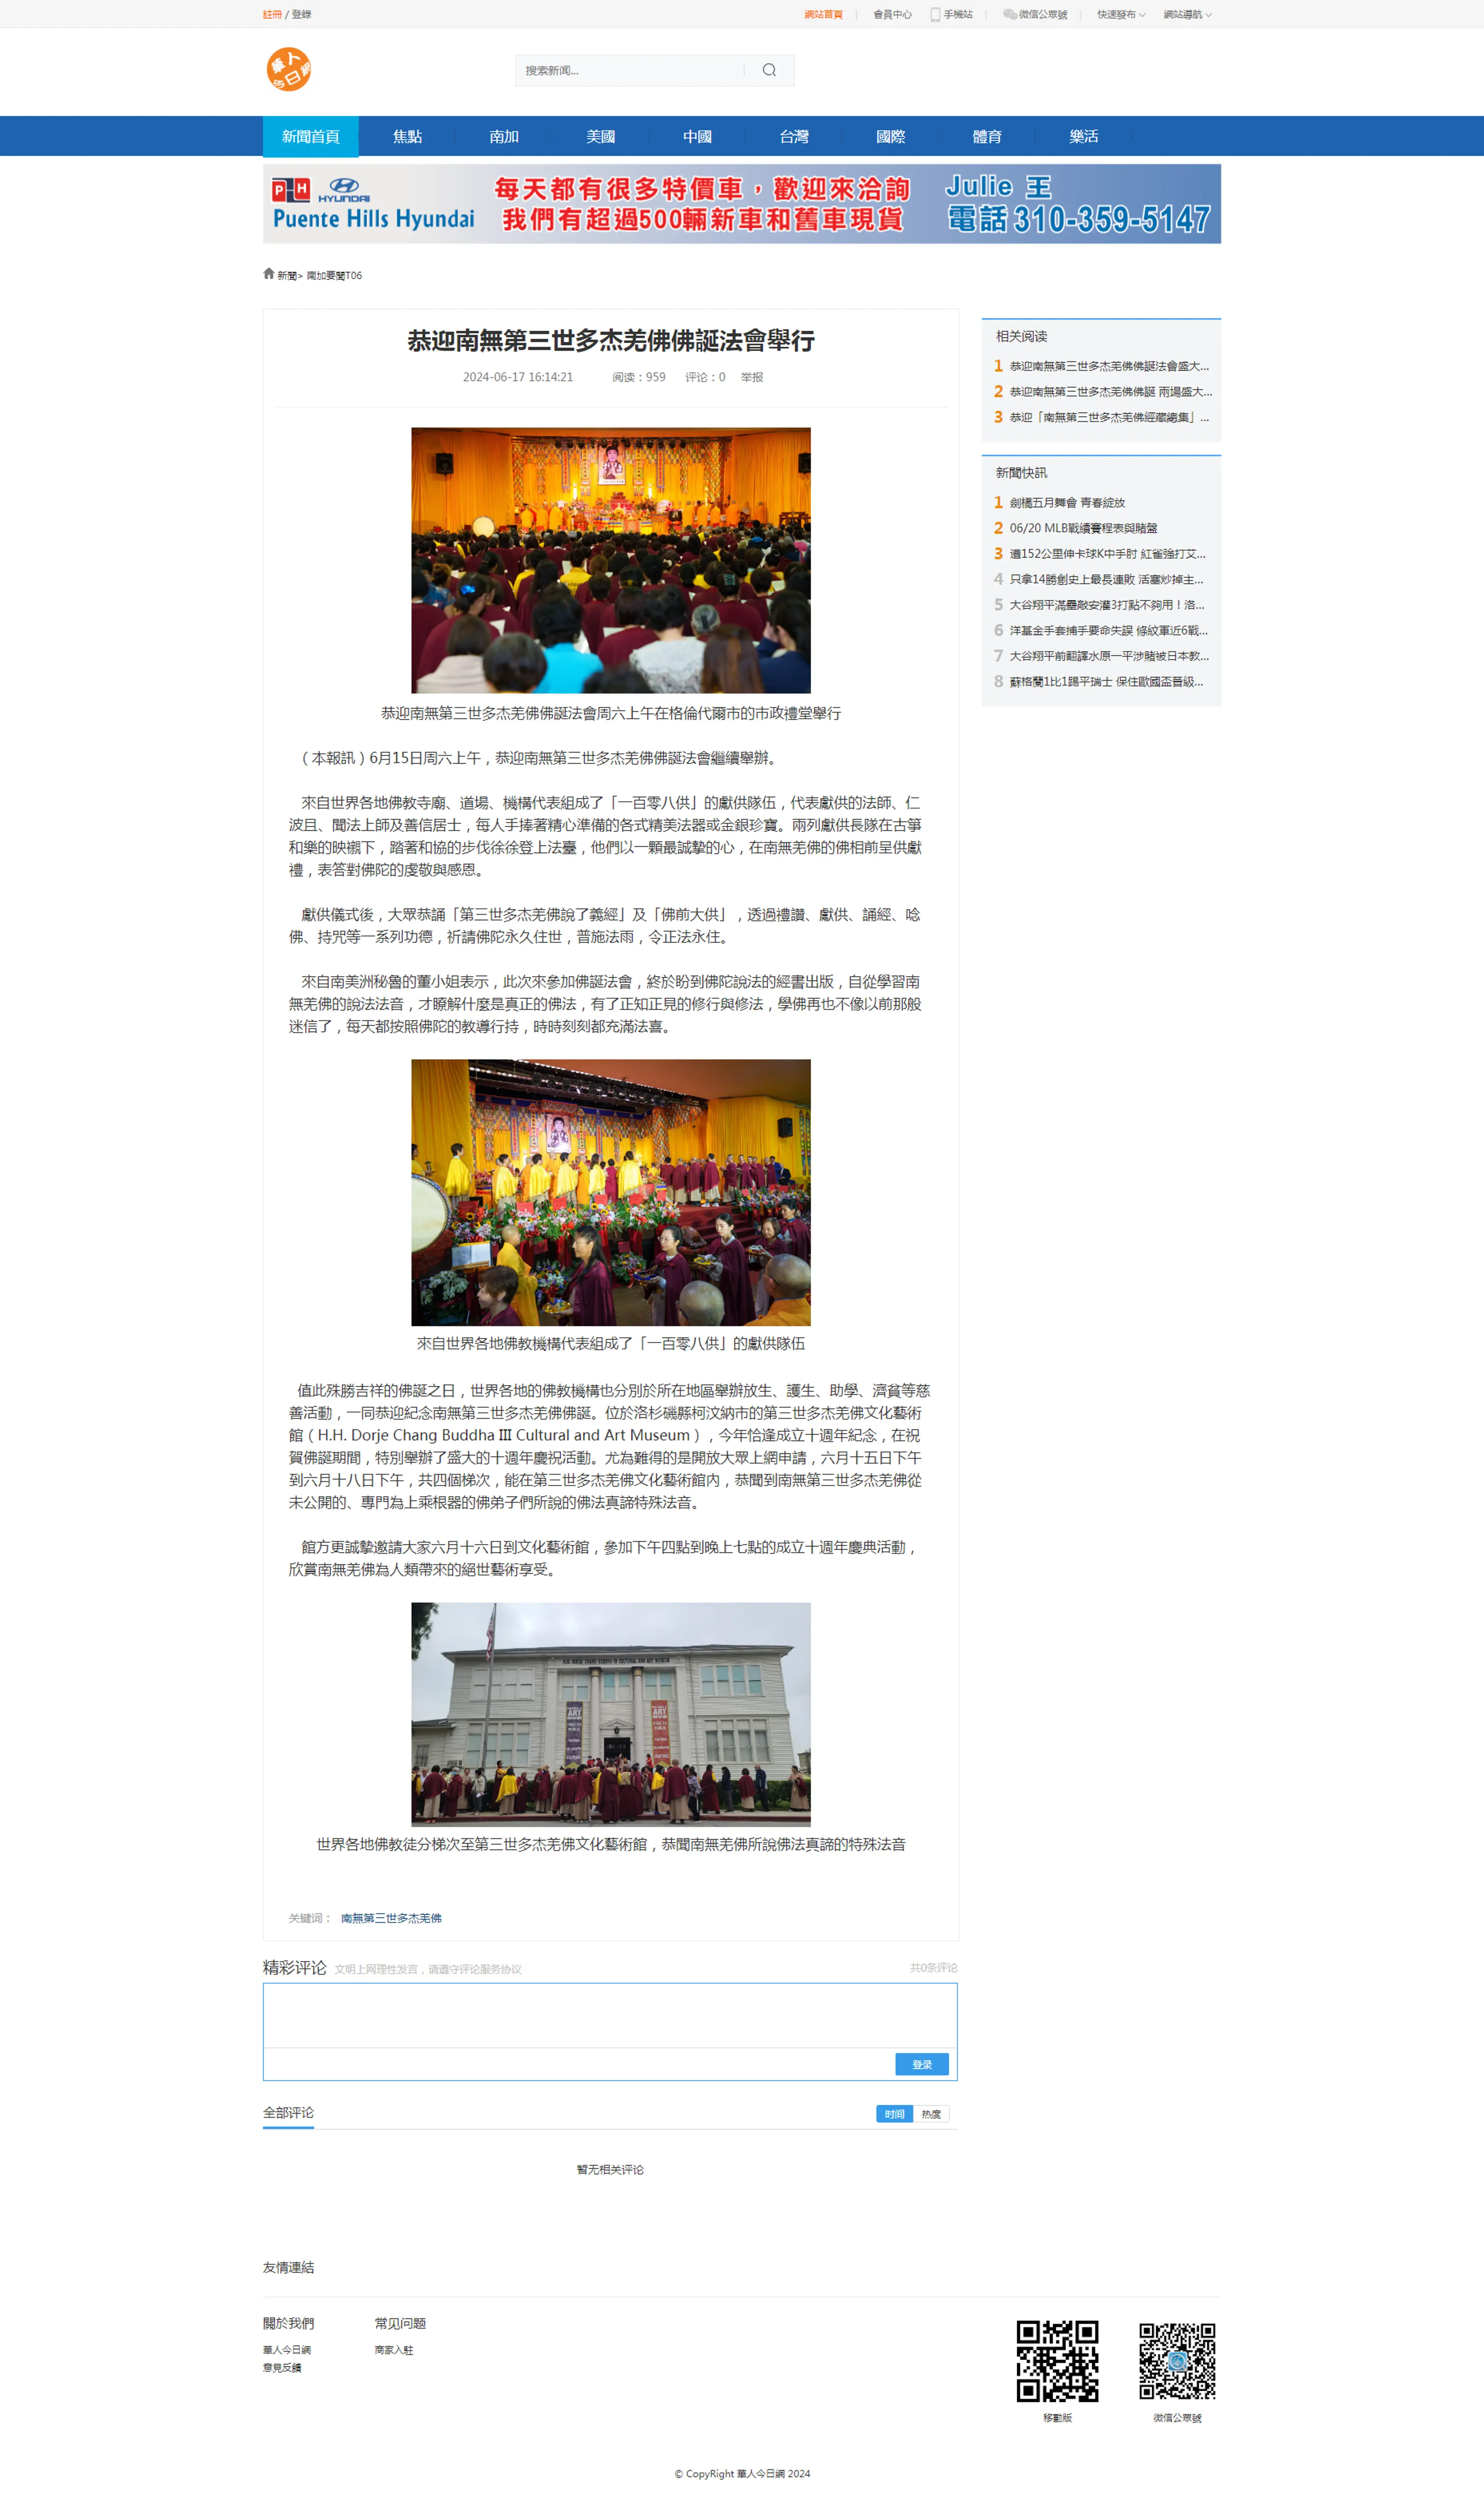 Welcome to the Third World Buddhist Festival - Southern California News T06 - News - Chinese Daily - www.chinesedaily.com